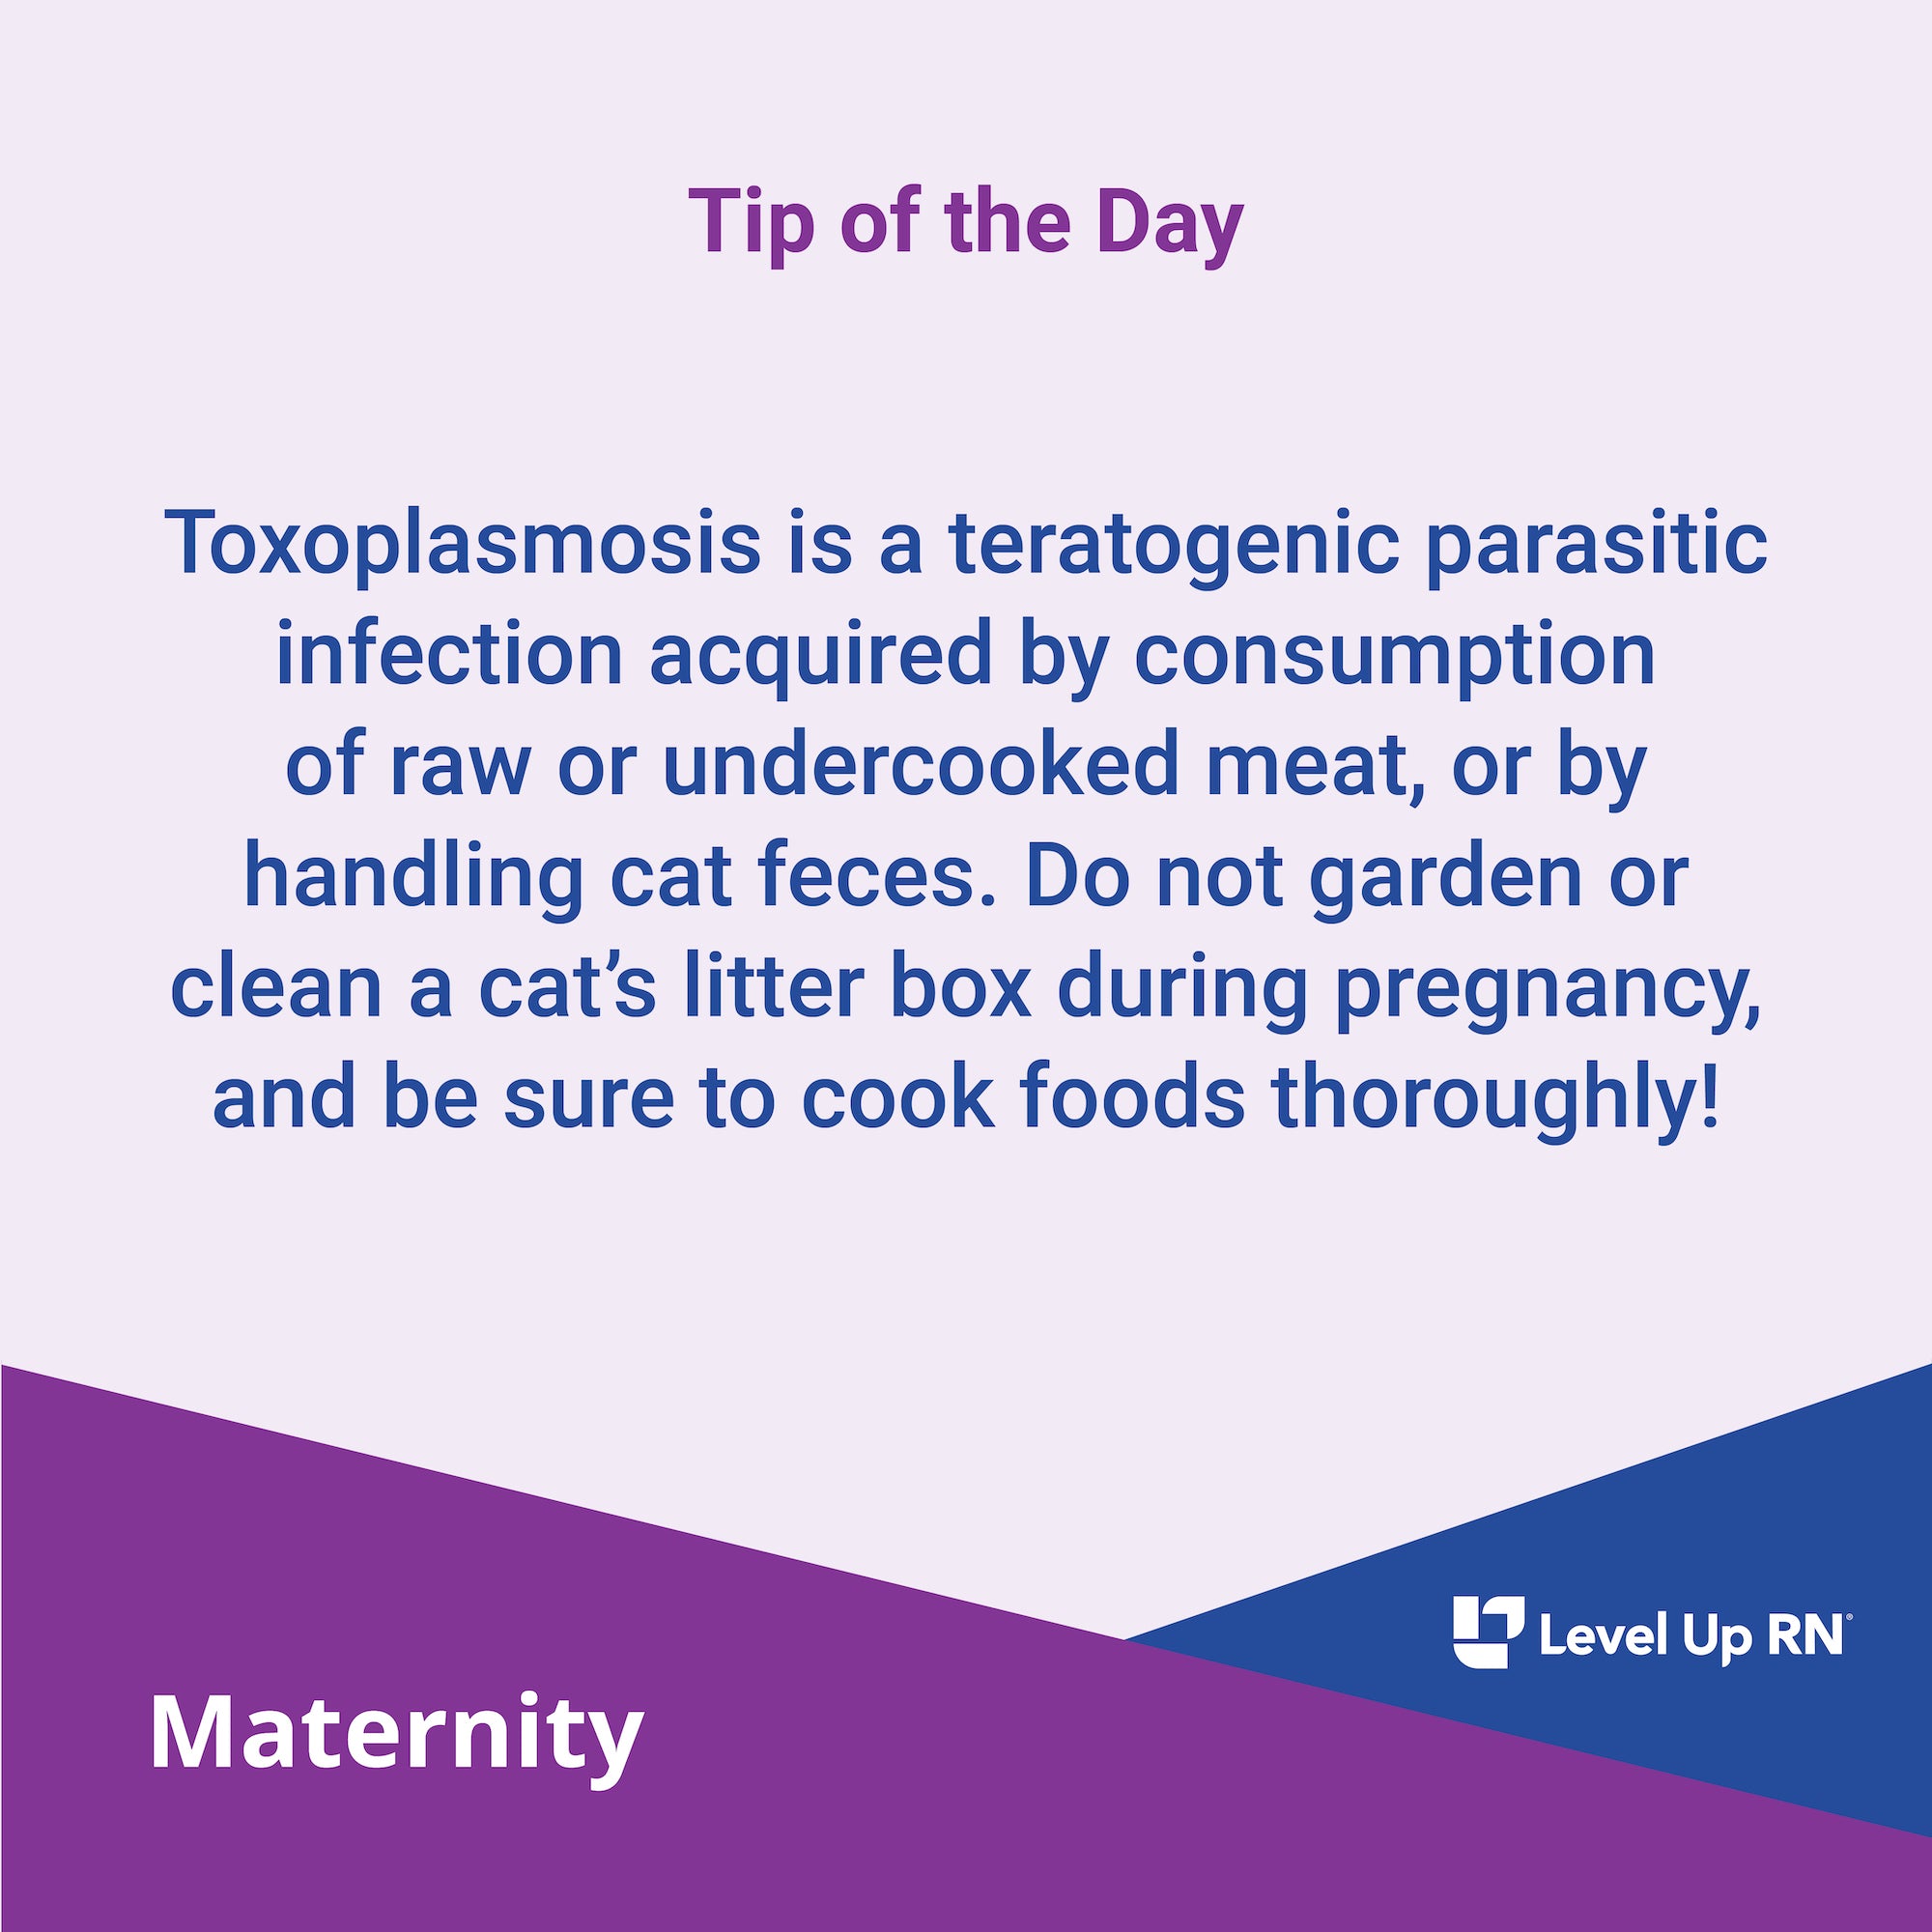 Toxoplasmosis is a teratogenic parasitic infection acquired by consumption of raw or undercooked meat, or by handling cat feces.